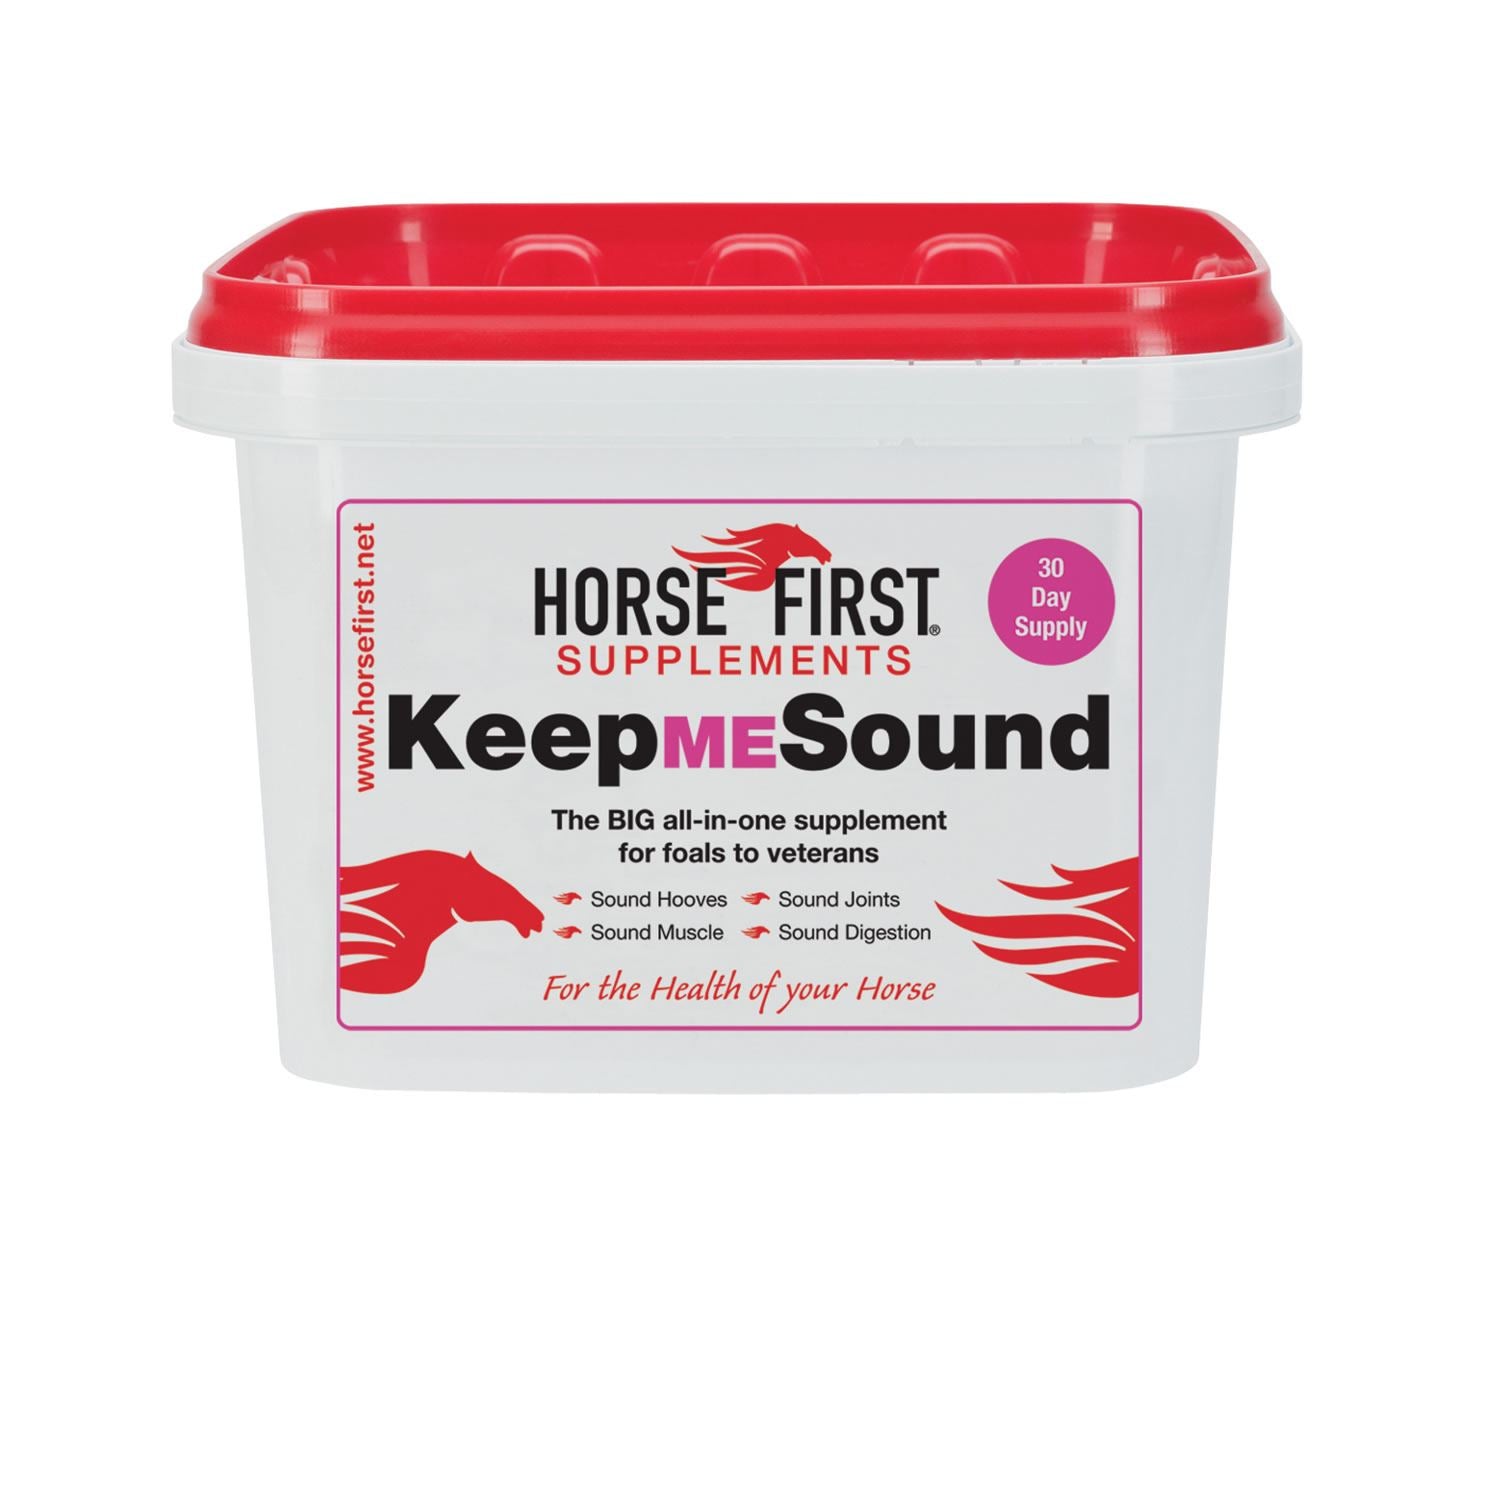 HORSE FIRST Keep Me Sound nurtures and cares for joints, hooves, coat, skin, and assists the digestive system, providing all-round help and support in a scoop.